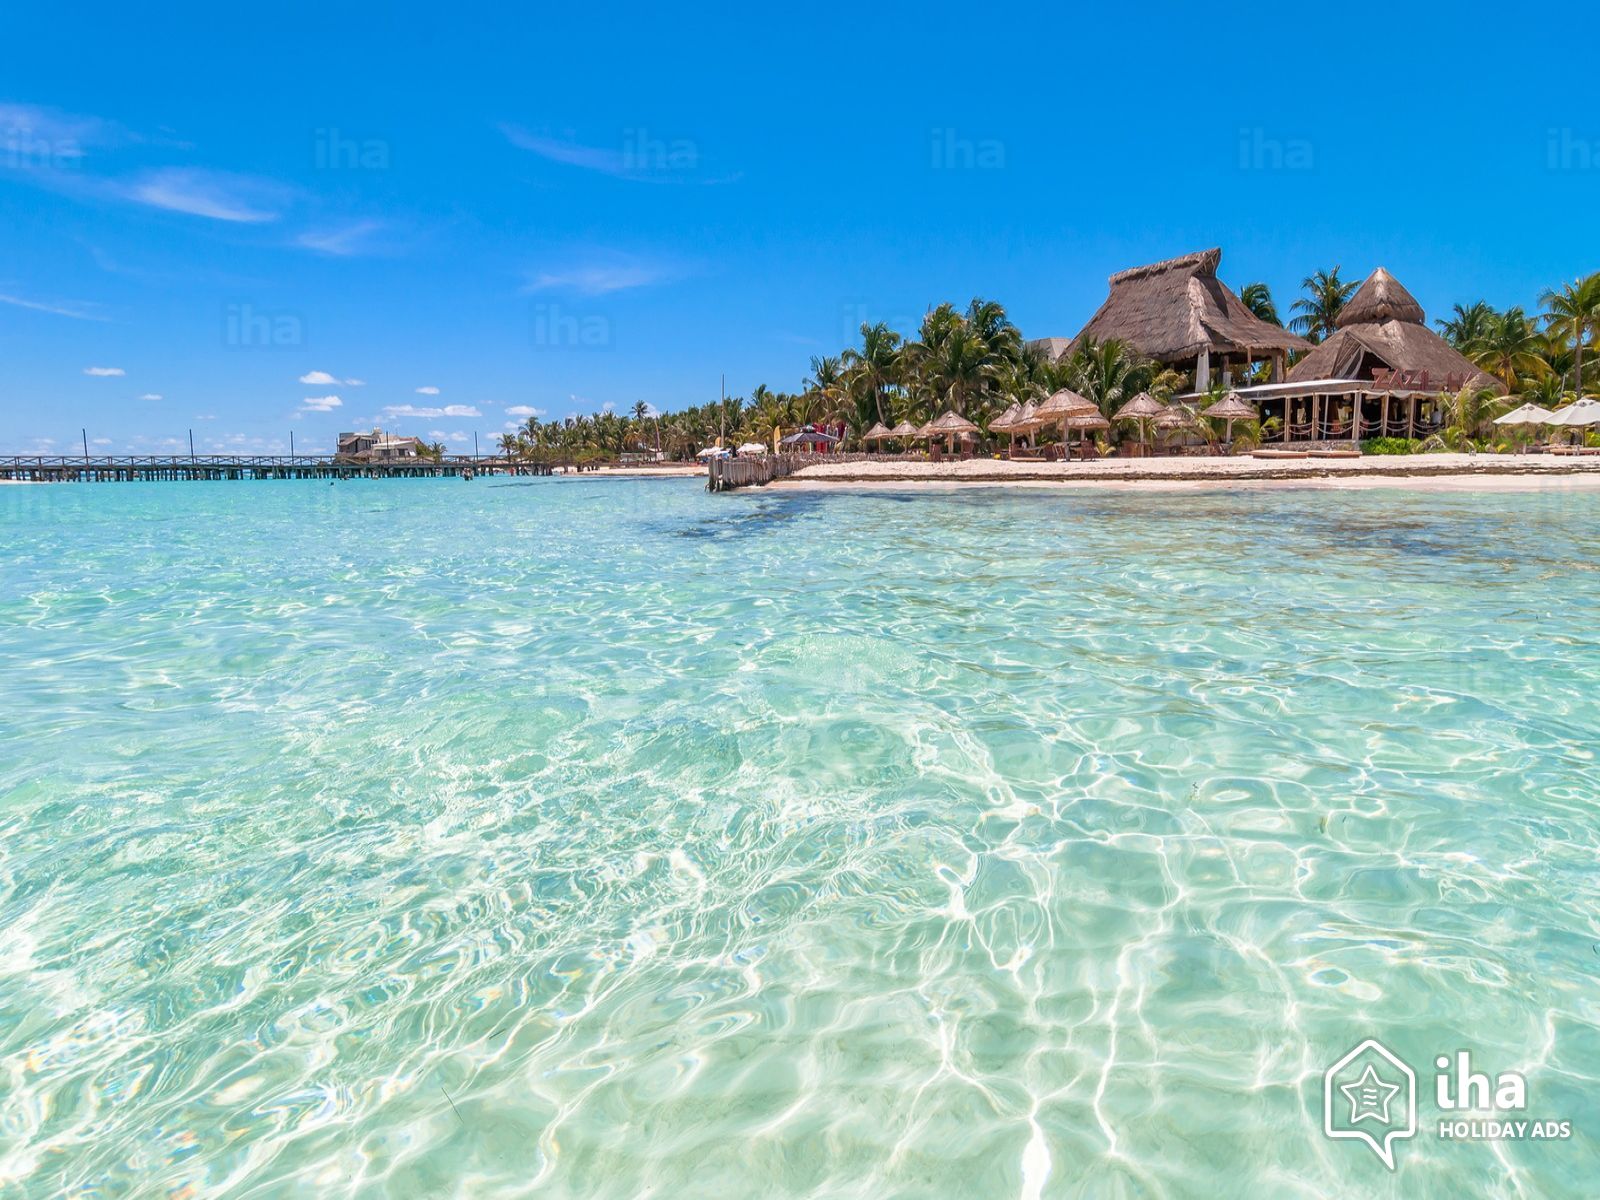 View Of The Clear Water Of Isla Mujeres - Playa De Las Mujeres Mexico - HD Wallpaper 